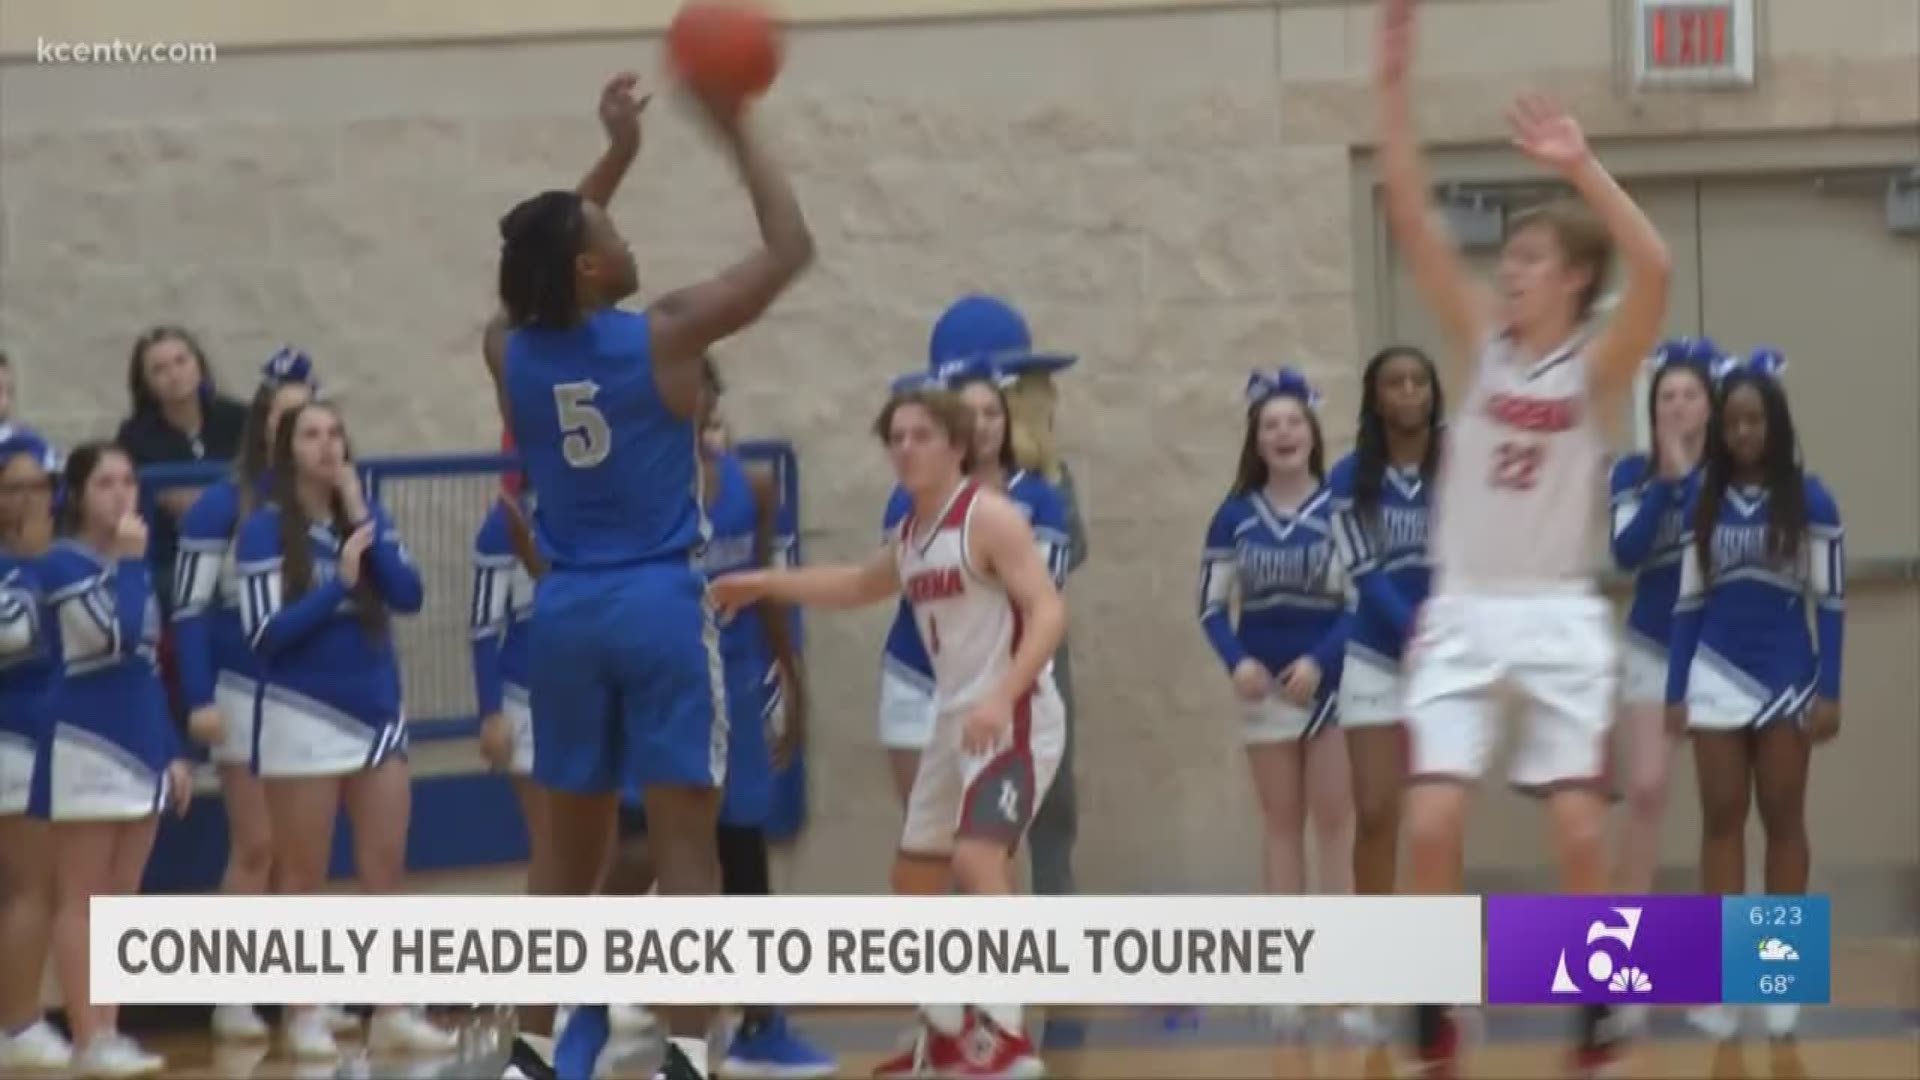 Despite the fact they have just one senior on the roster, Connally is advancing to the regional tournament for the third year in a row.